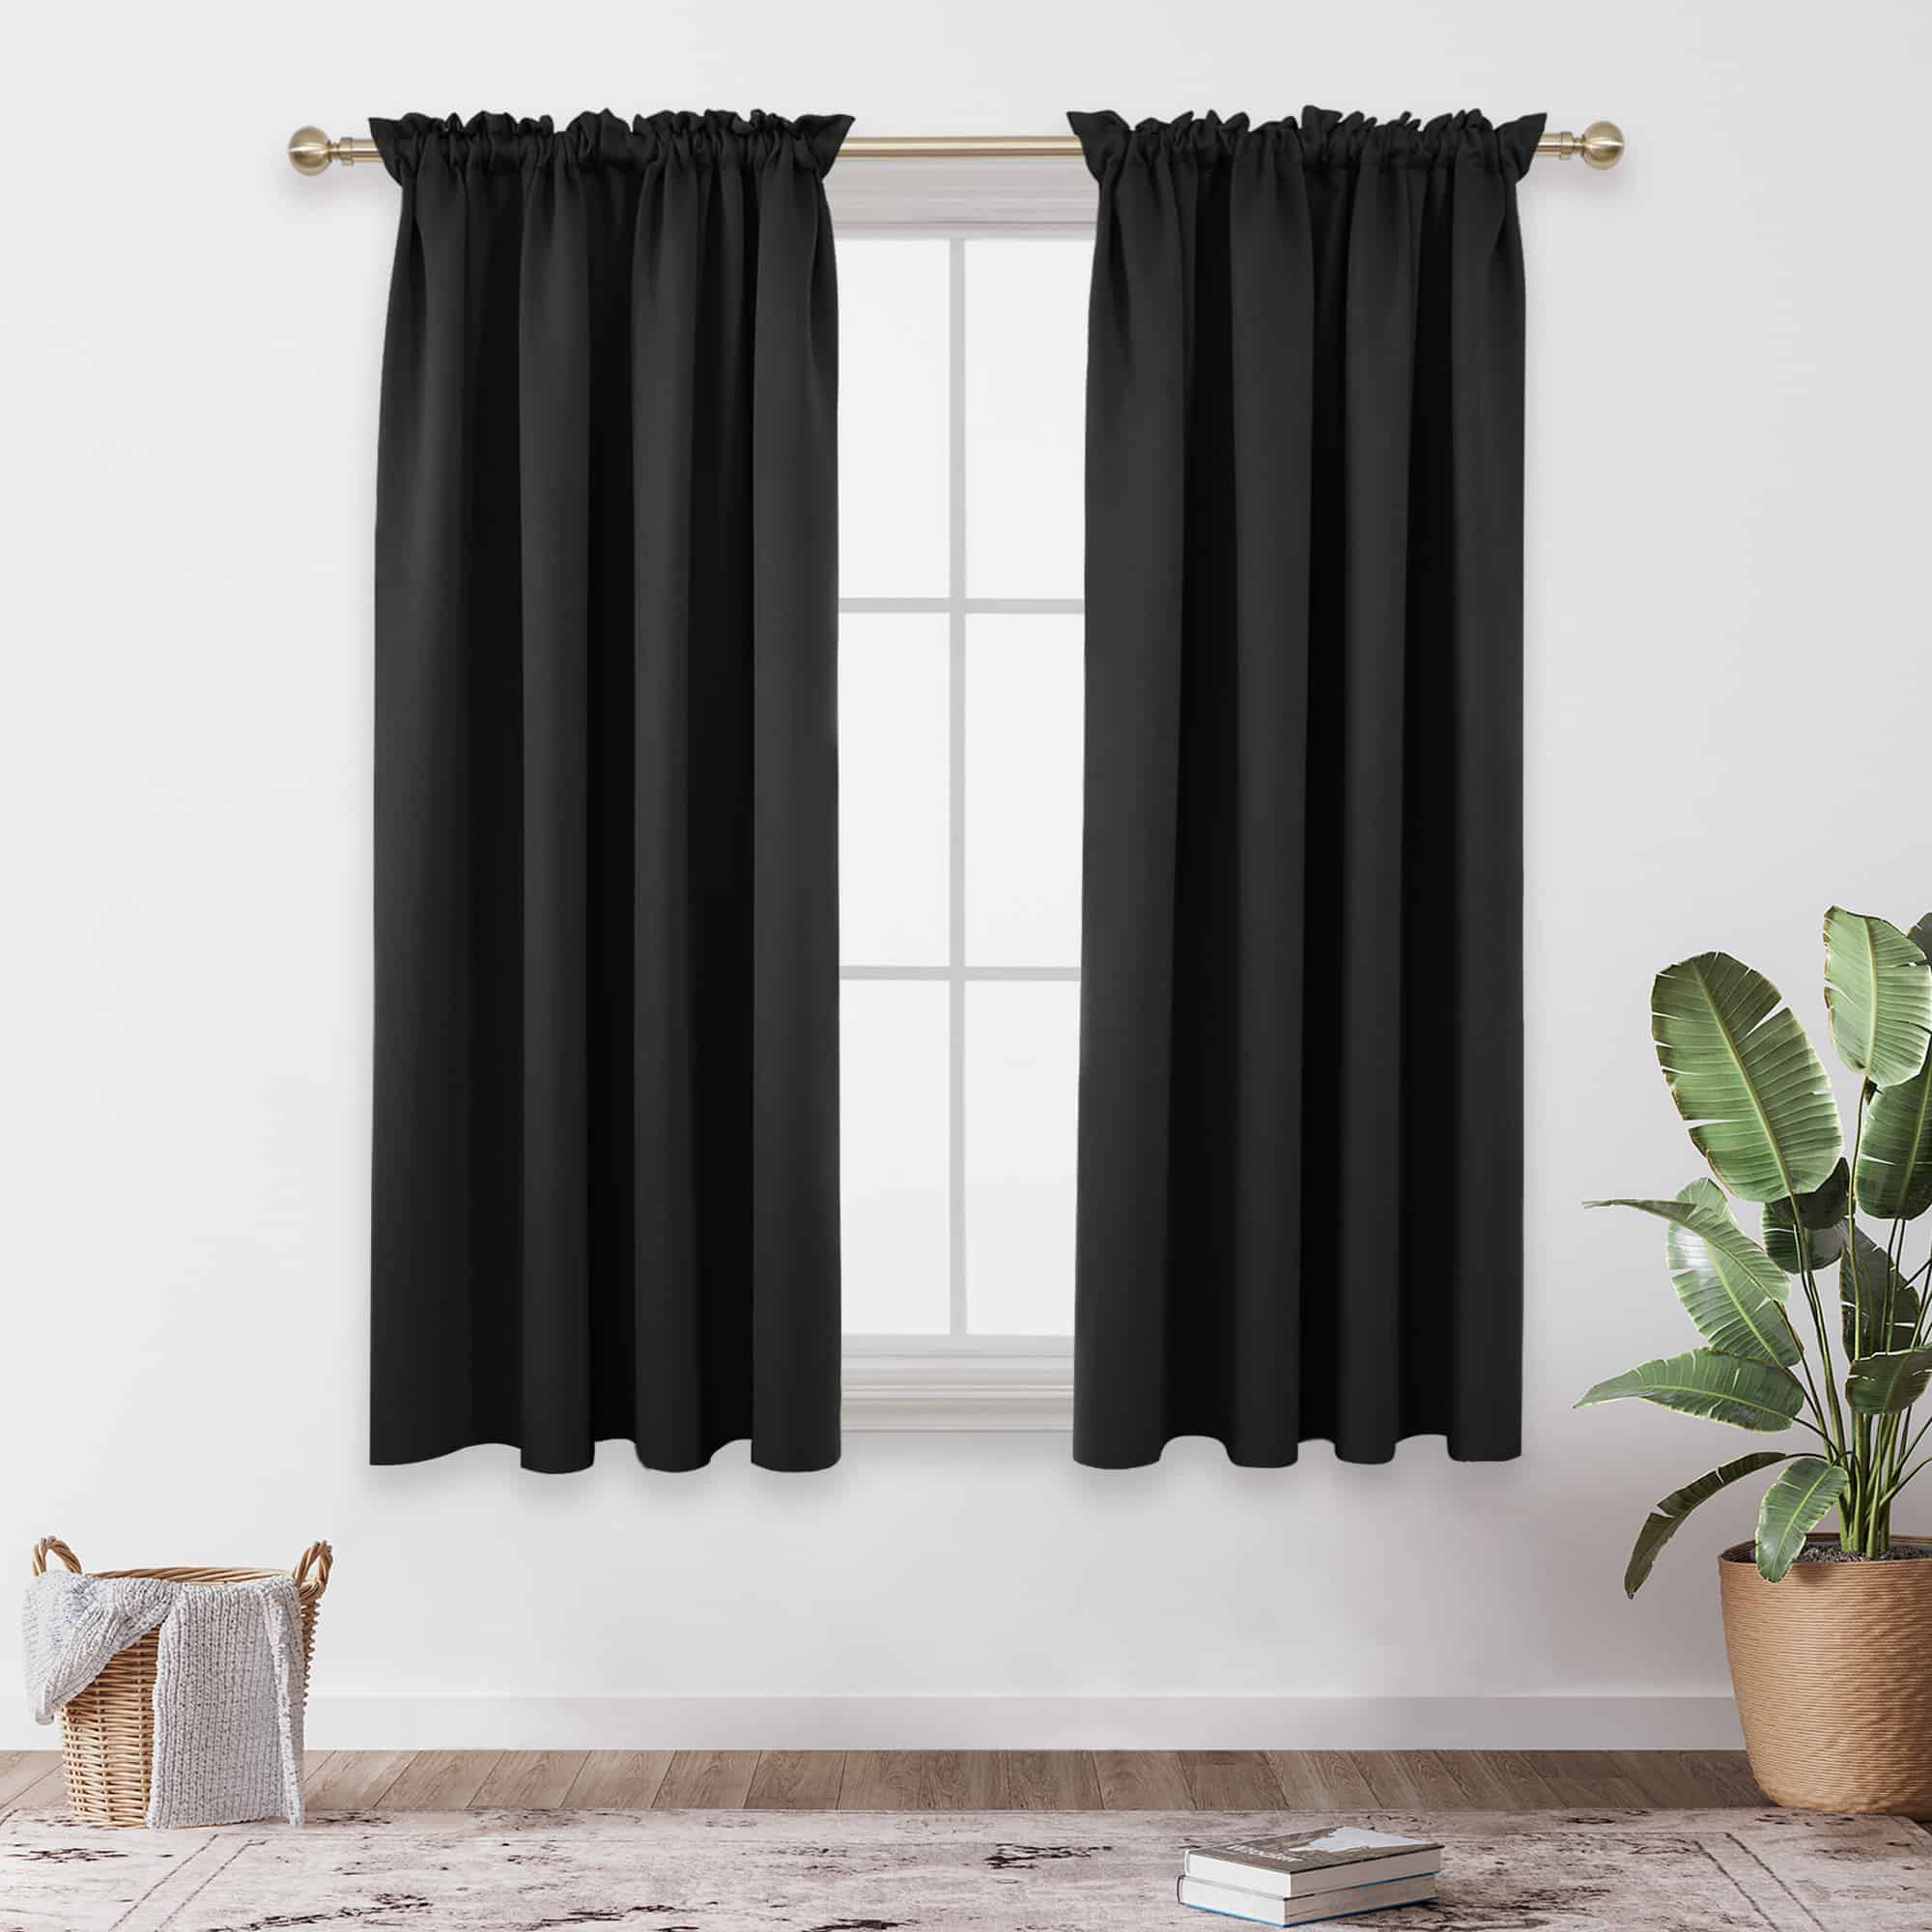 Black double panel drapes for living room window 